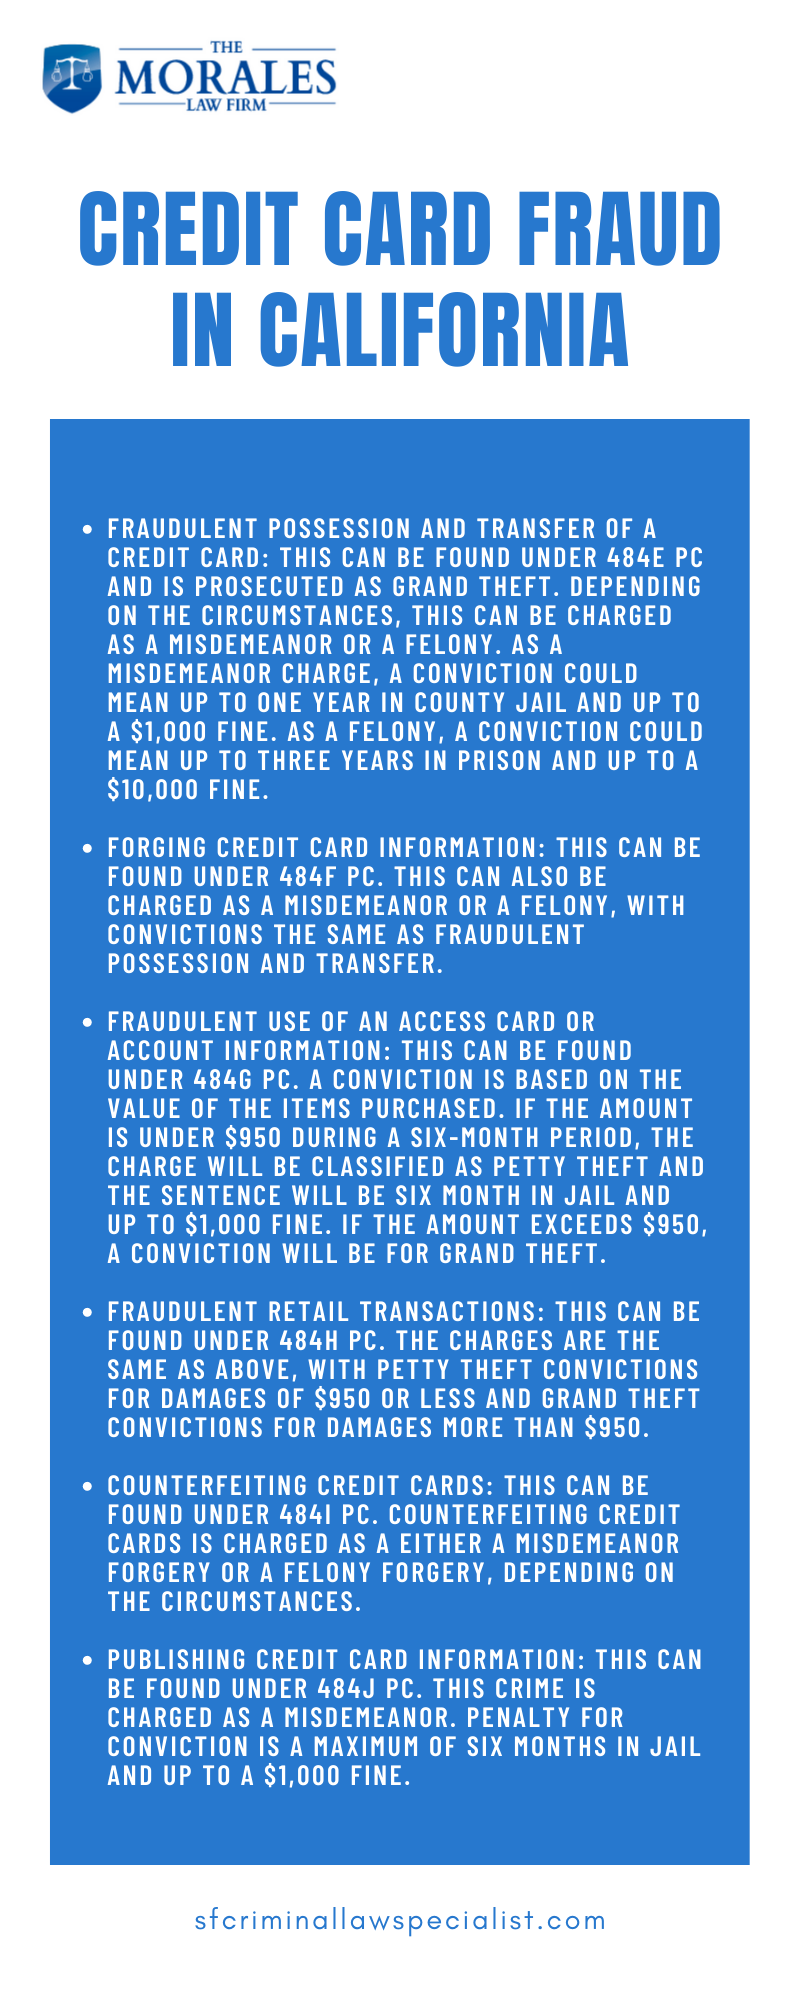 CREDIT CARD FRAUD IN CALIFORNIA INFOGRAPHIC